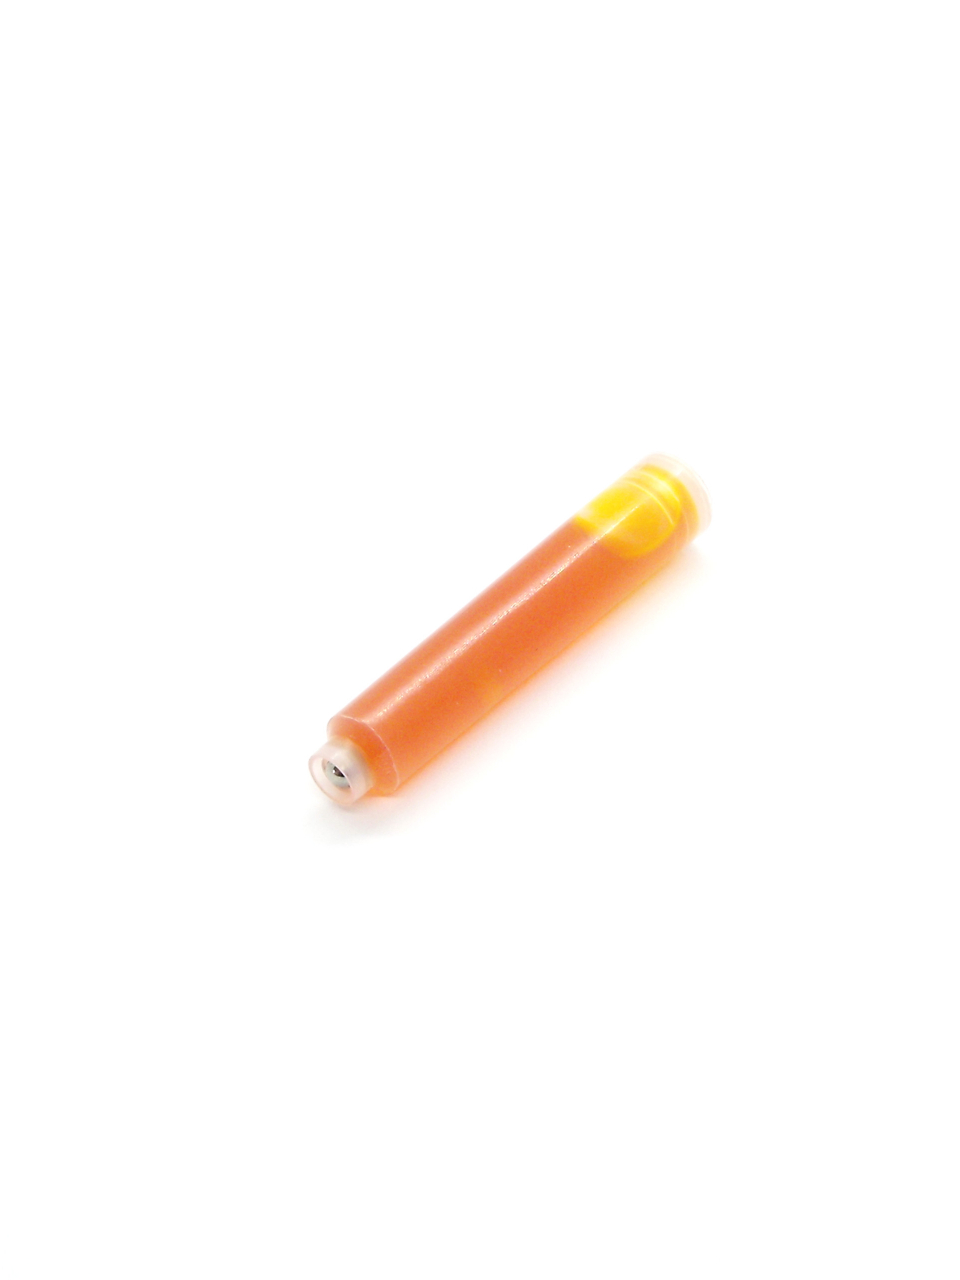 Cartridges For Staedtler Fountain Pens (Yellow)